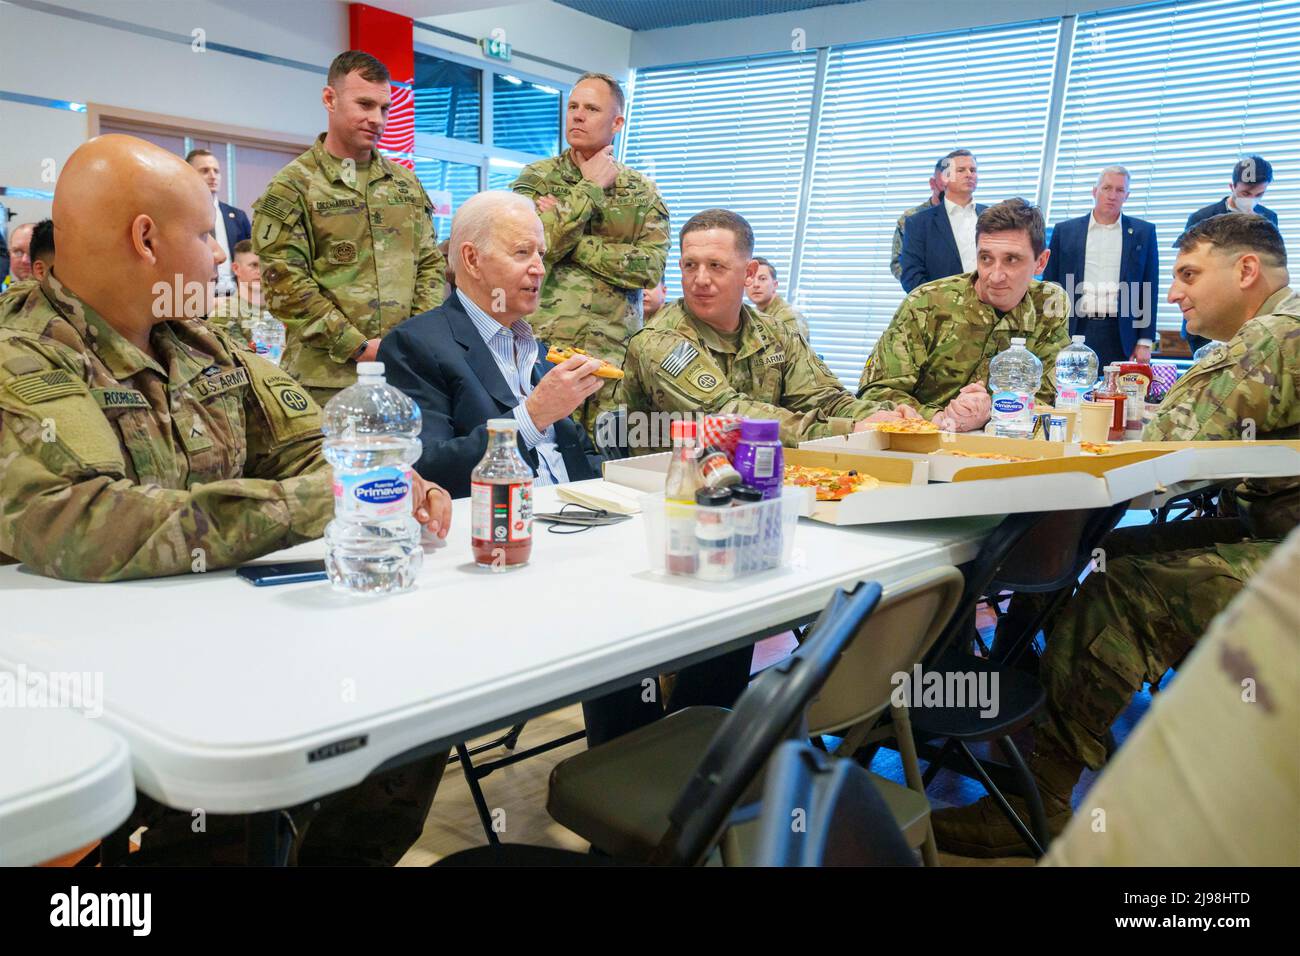 Rzeszow, Poland. 25 March, 2022. U.S President Joe Biden, enjoys lunch with members of the U.S. Army 82nd Airborne Division during a visit March 25, 2022 in Rzeszow, Poland.  Credit: Adam Schultz/White House Photo/Alamy Live News Stock Photo